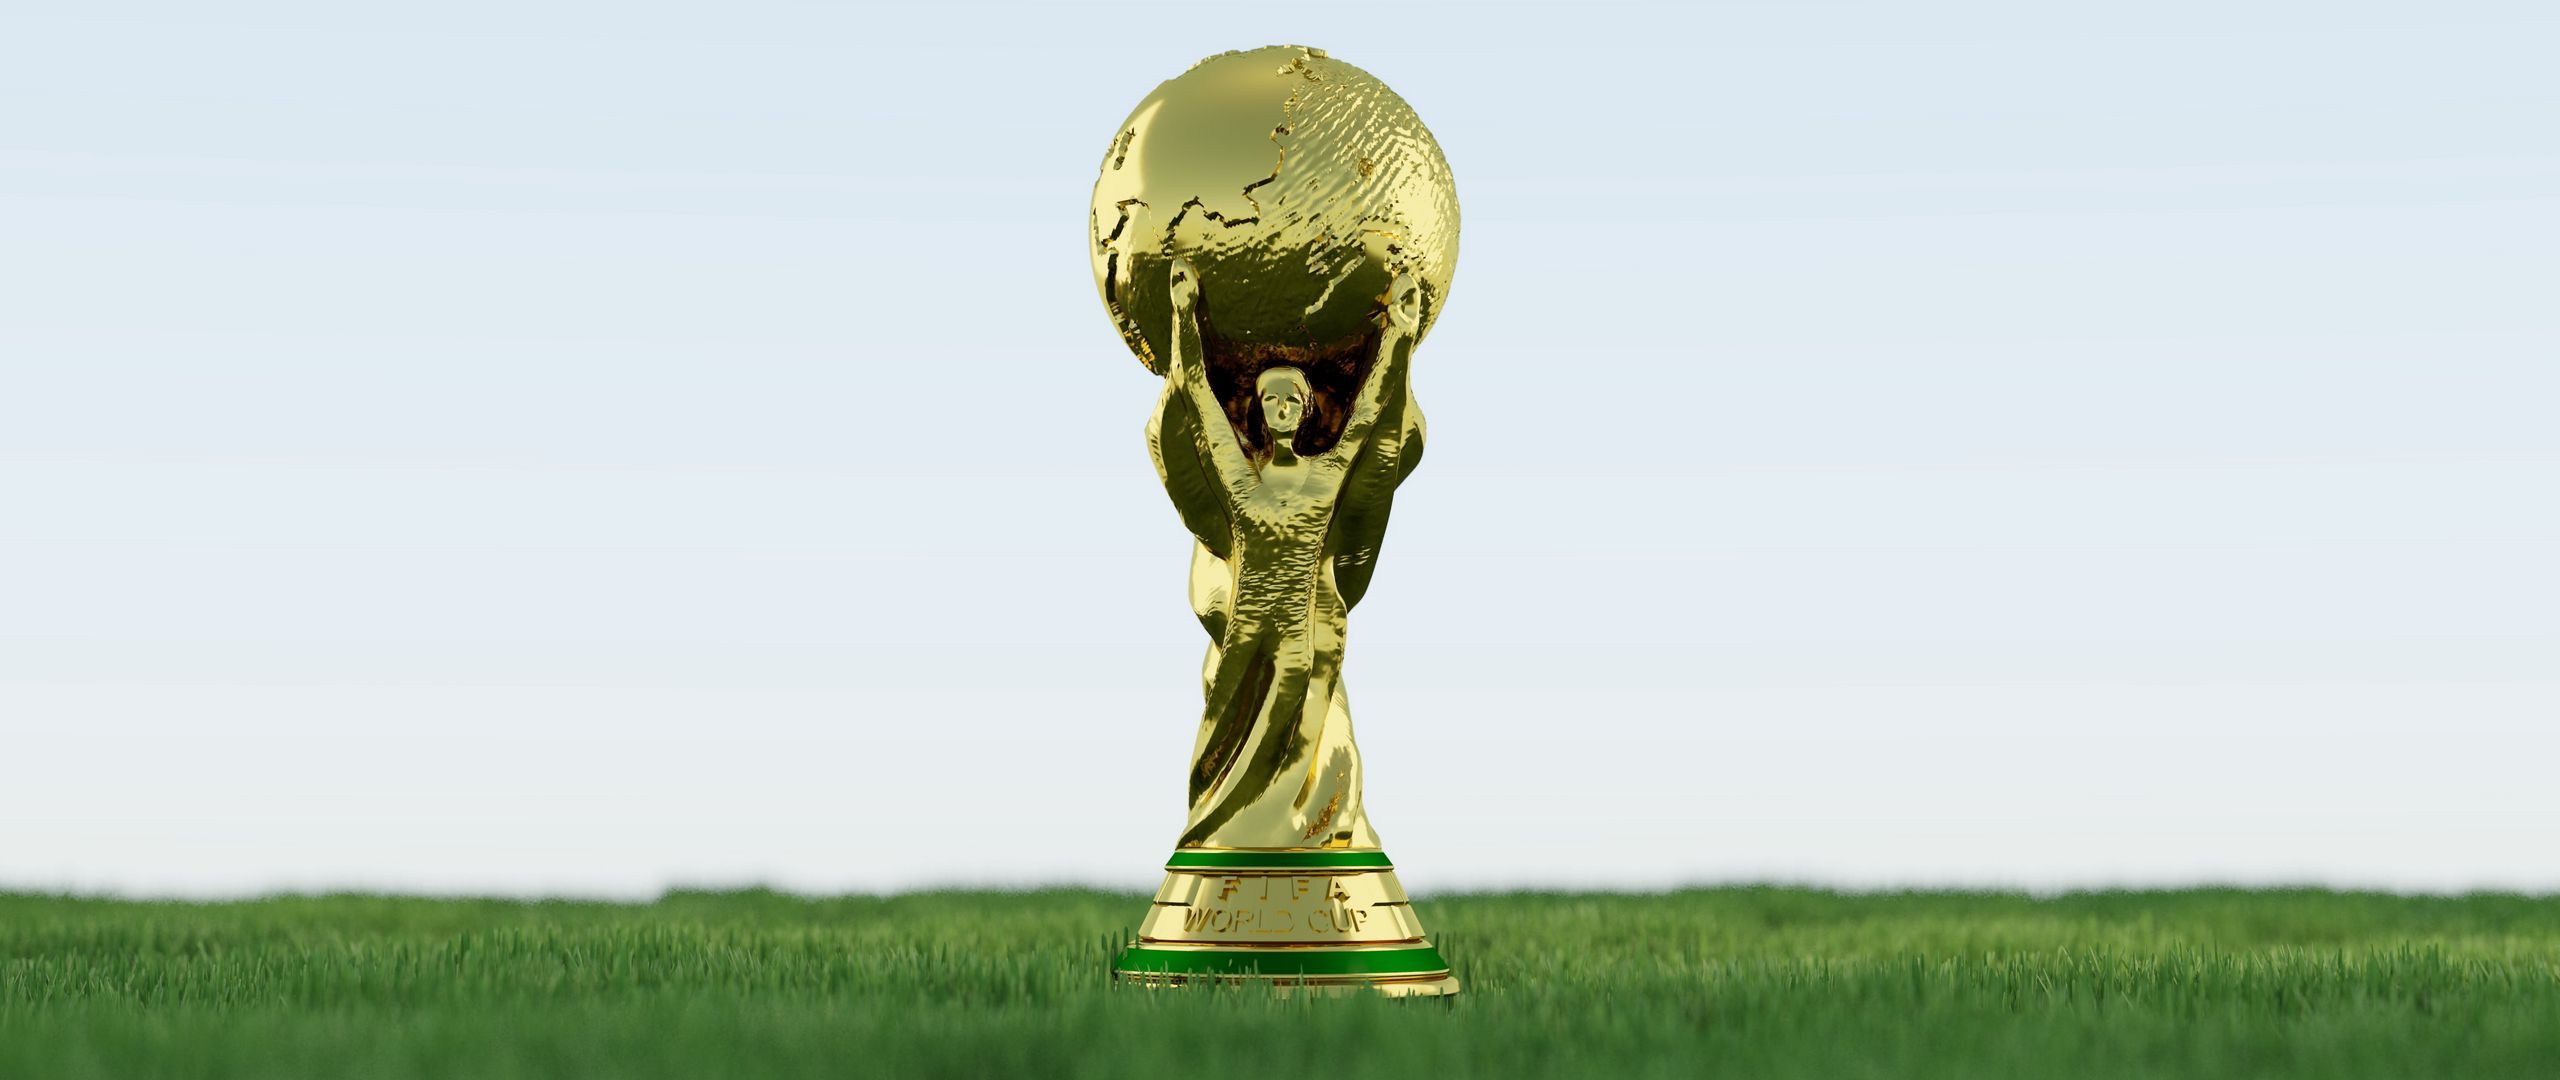 Download wallpaper 2560x1080 goblet, fifa world cup, football, trophy, championship dual wide 1080p HD background